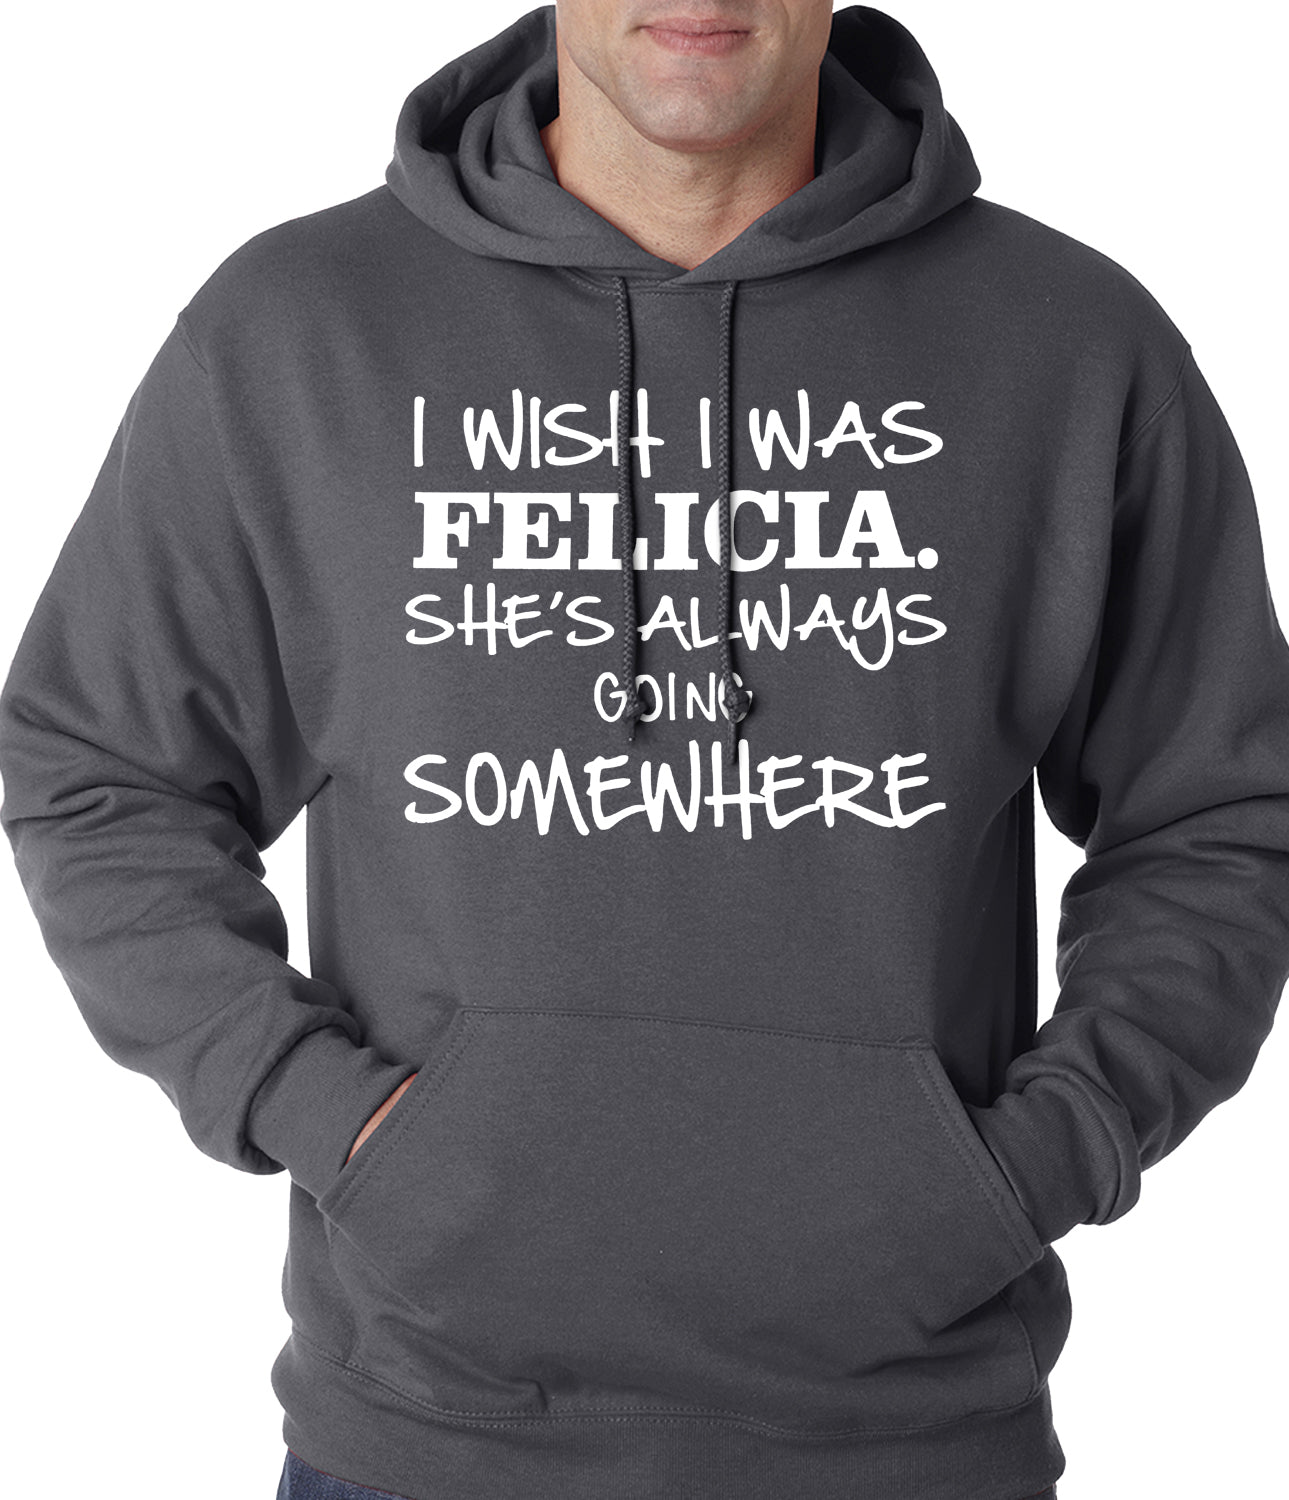 I Wish I Was Felicia. She's Always Going Somewhere Adult Hoodie